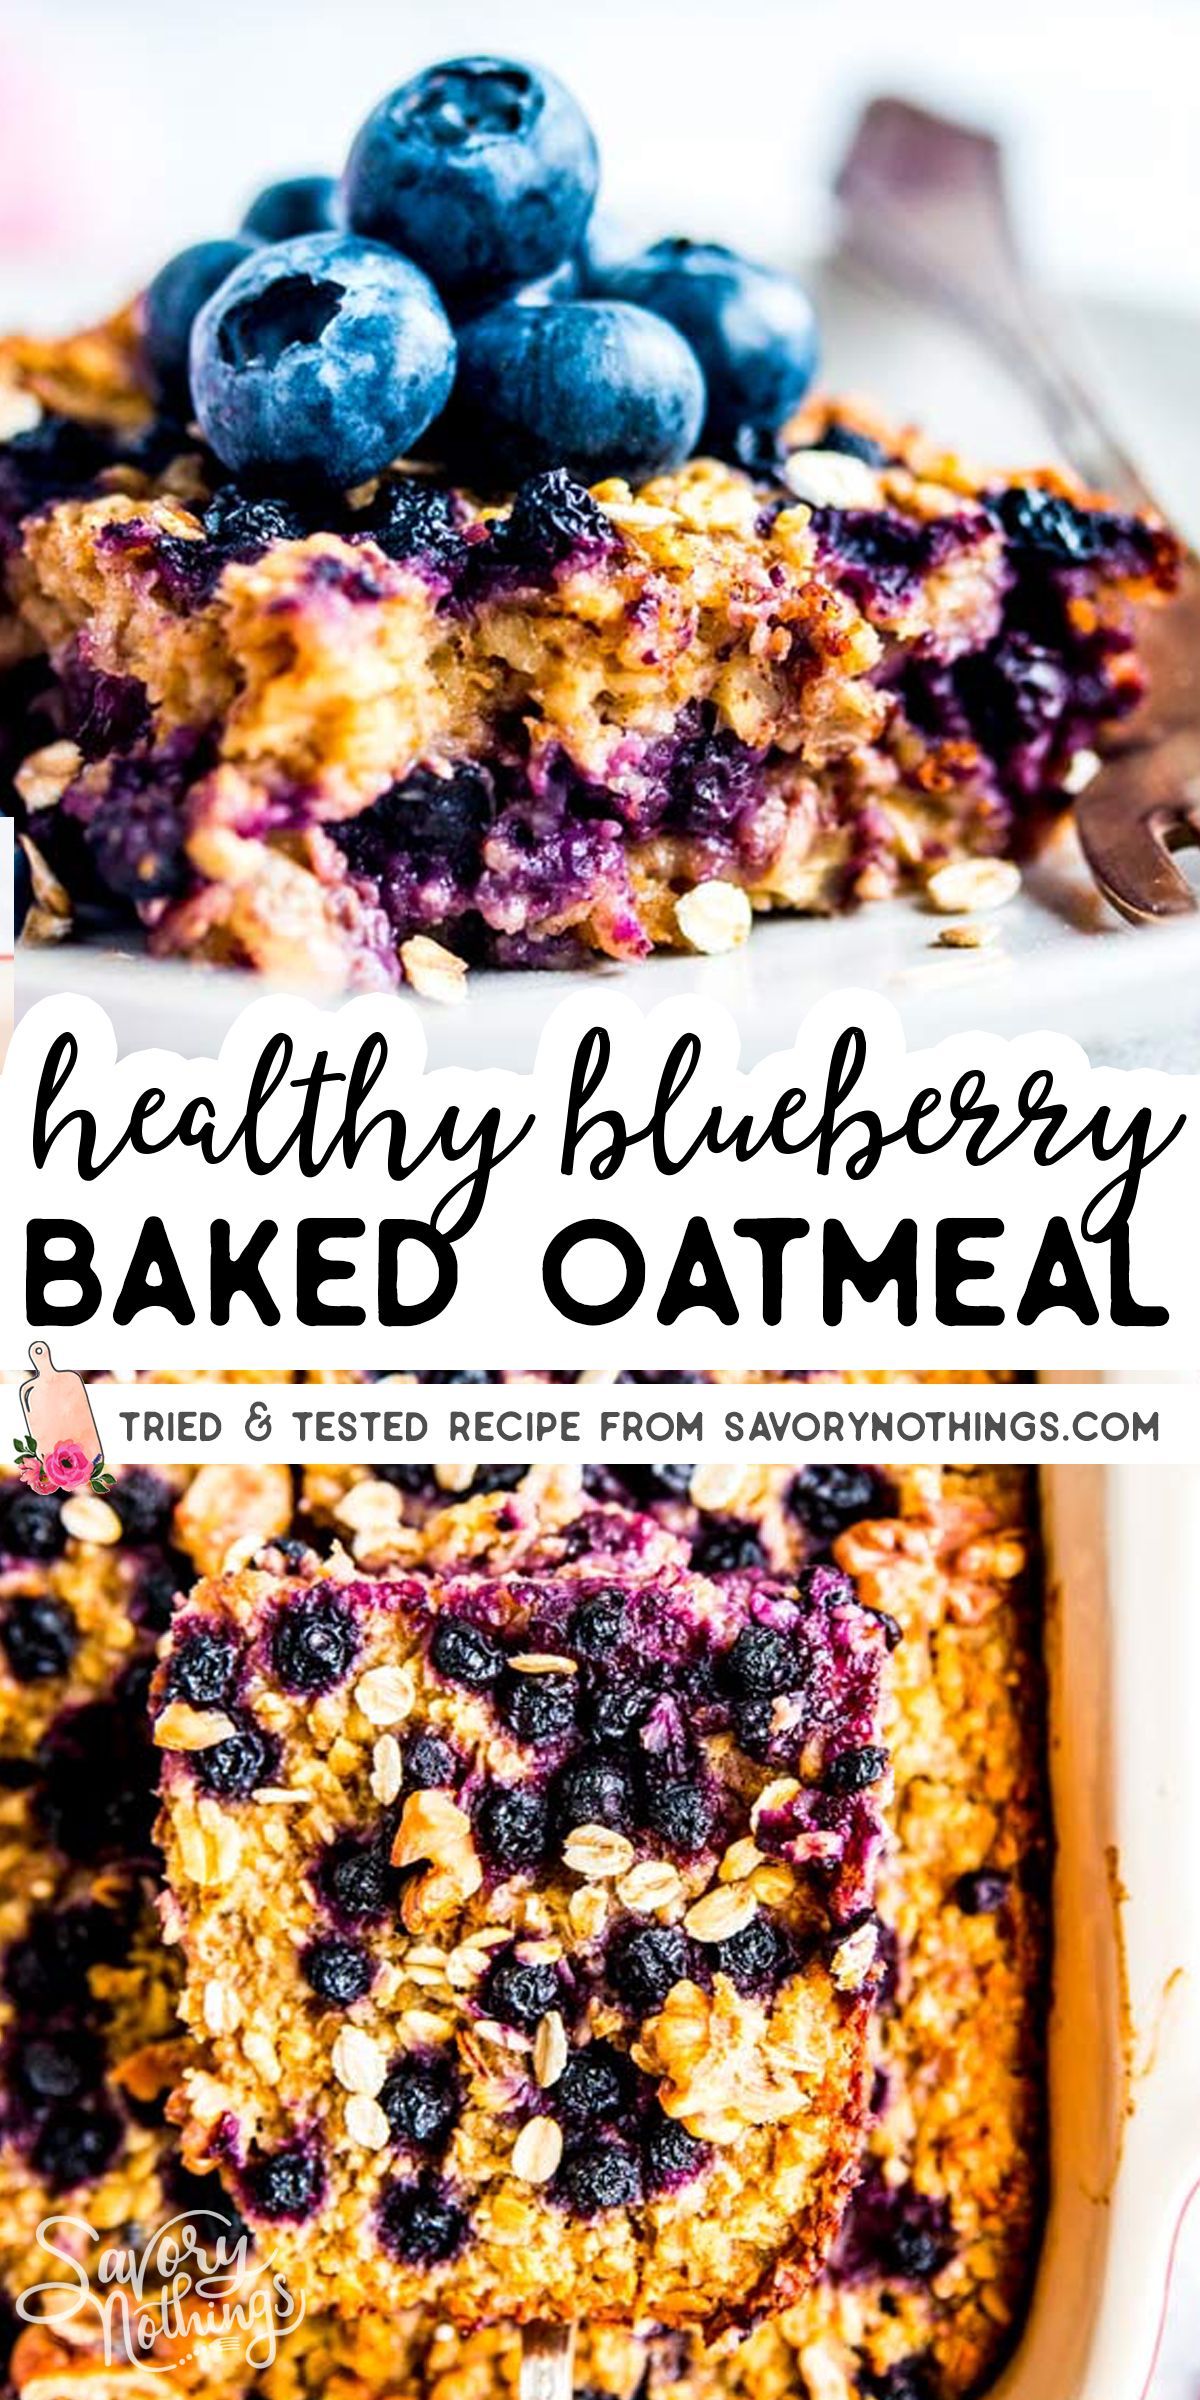 Easy and Healthy Blueberry Baked Oatmeal Recipe -   17 desserts Blueberry clean eating ideas